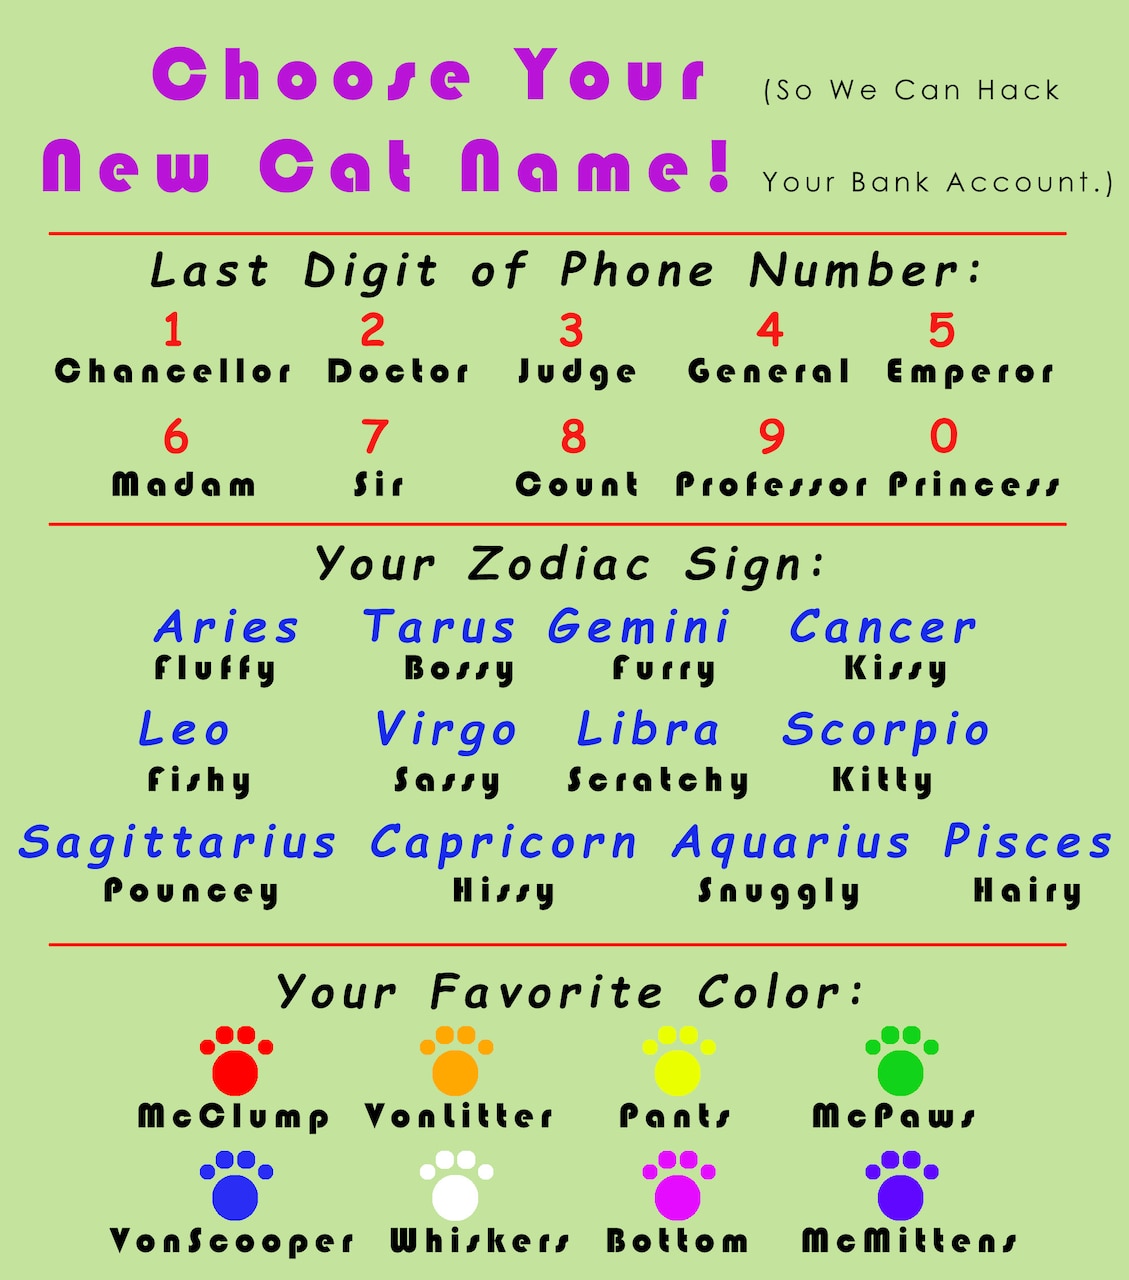 A graphic asks the viewer to construct a name for their cat by choosing from an array of names that are listed.